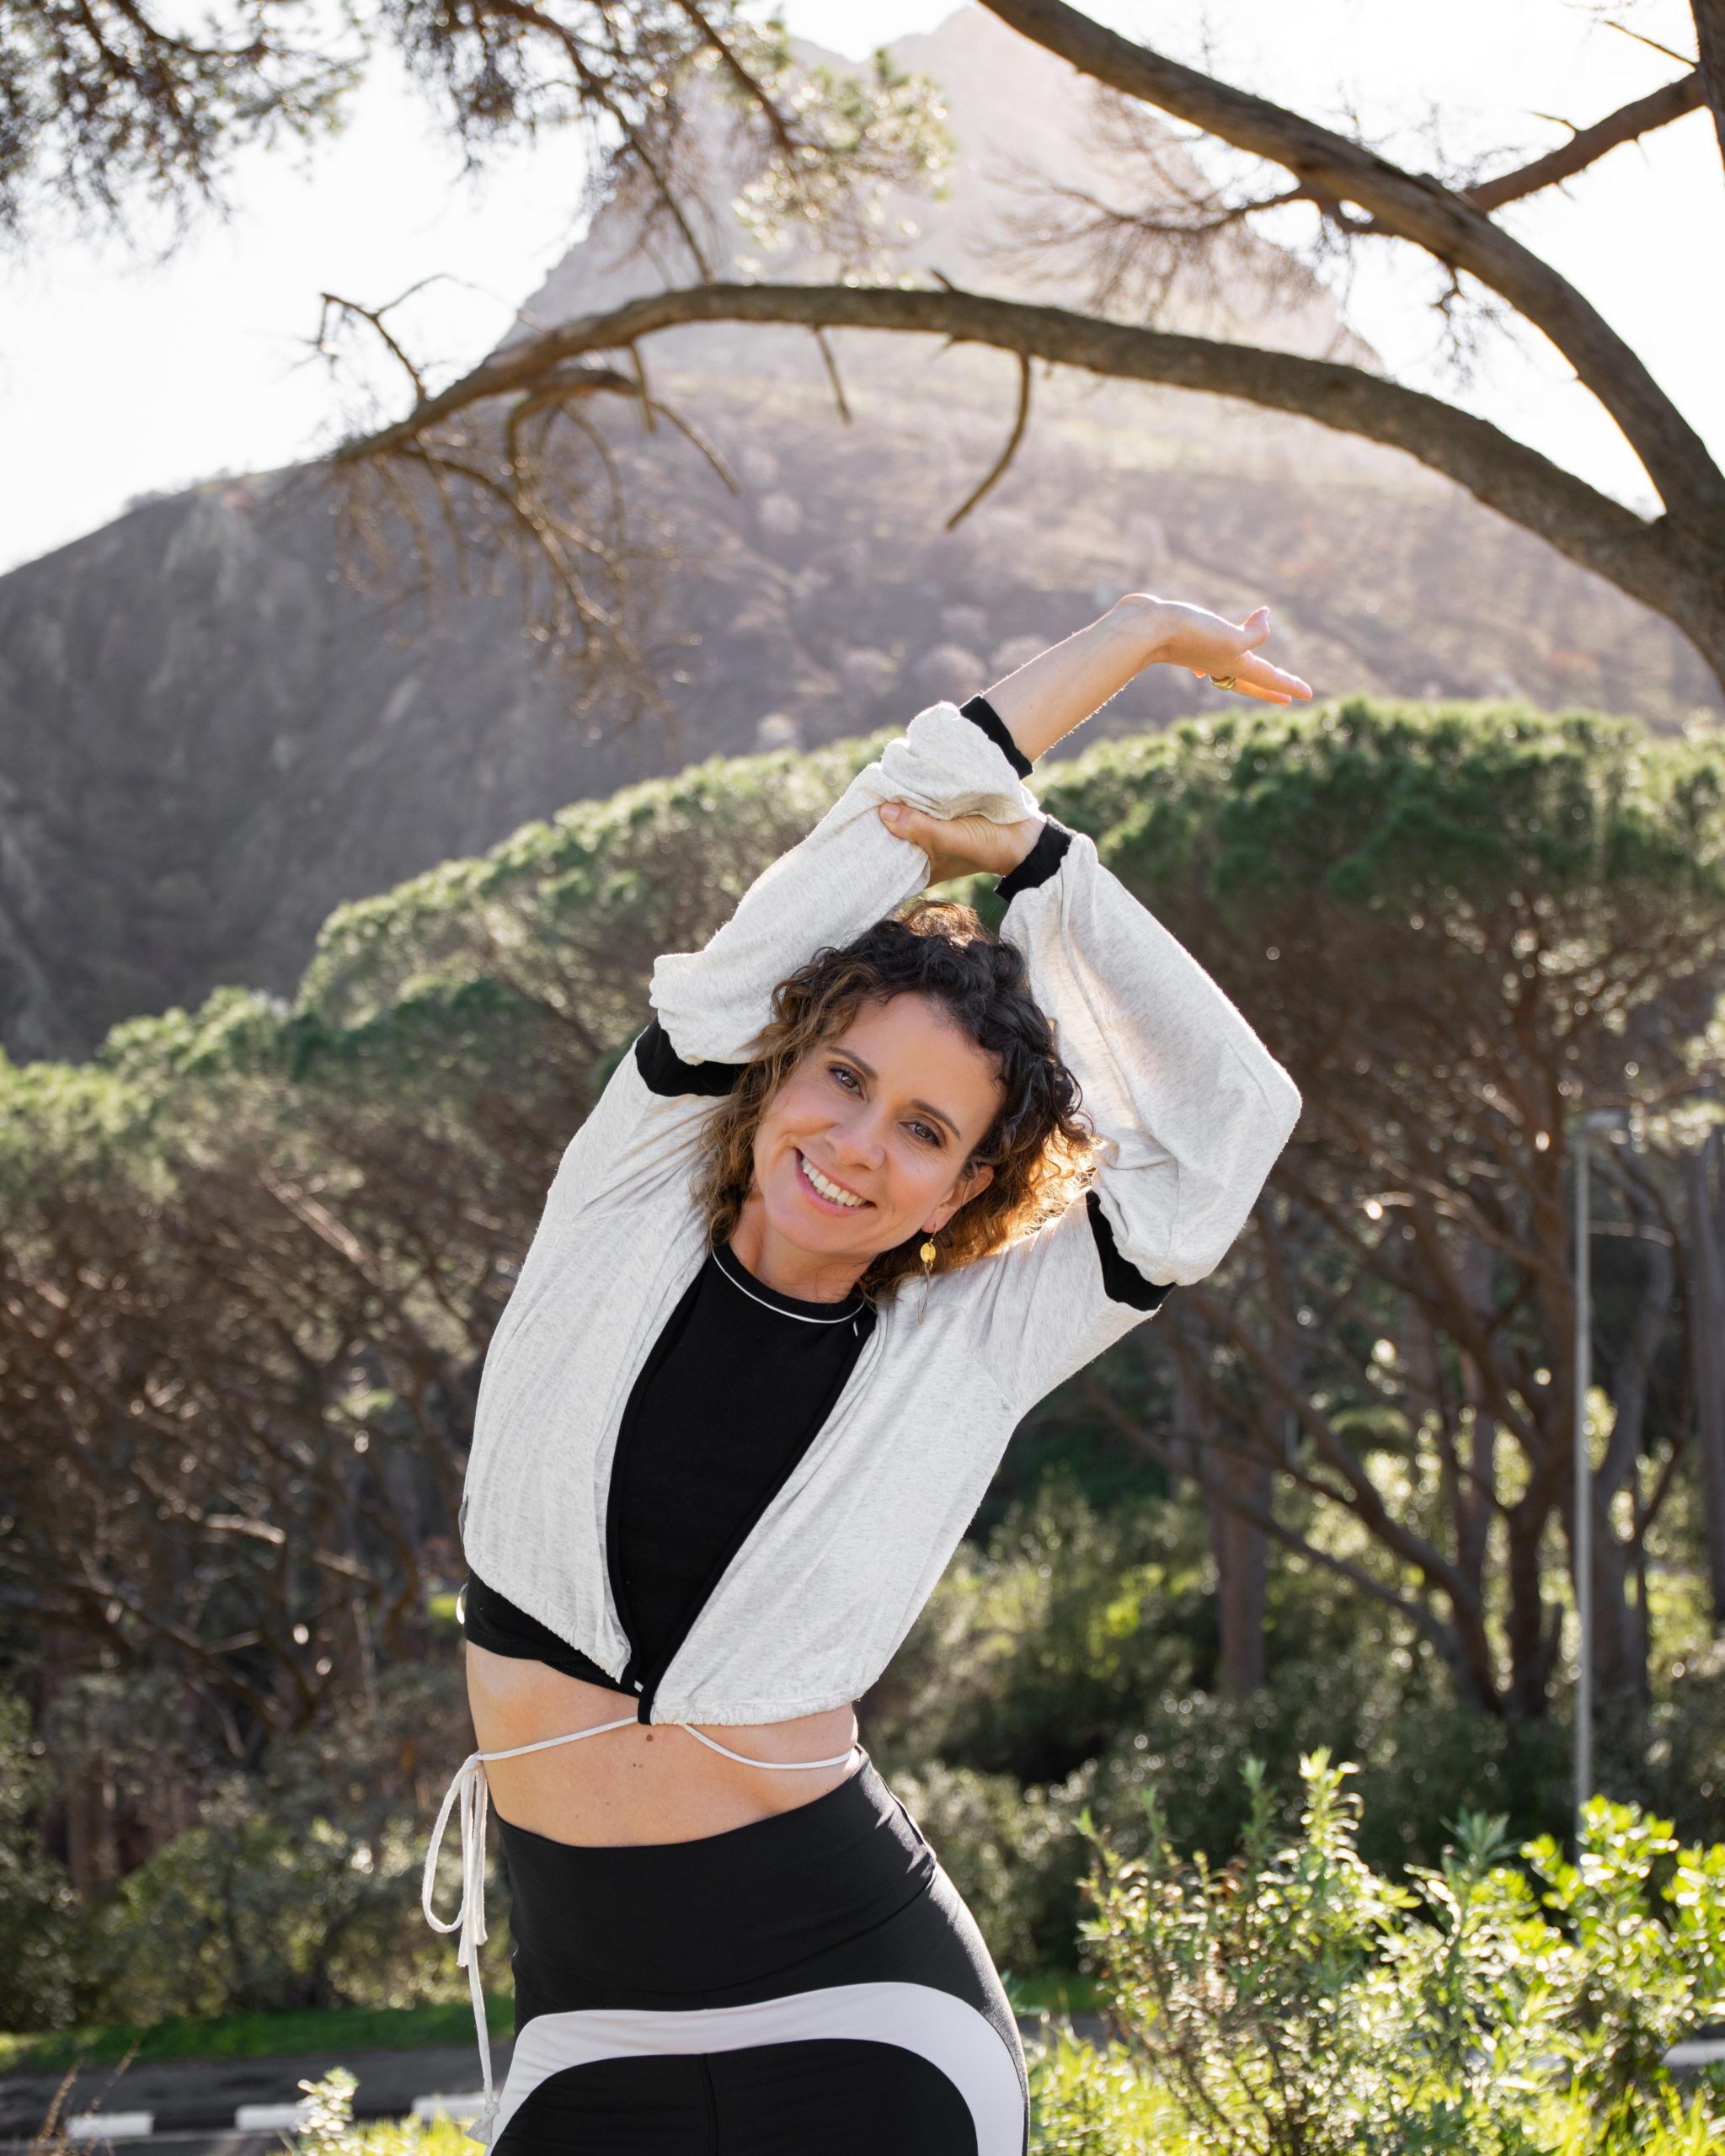 Rita Pires doing a yoga pose in front of the mountain